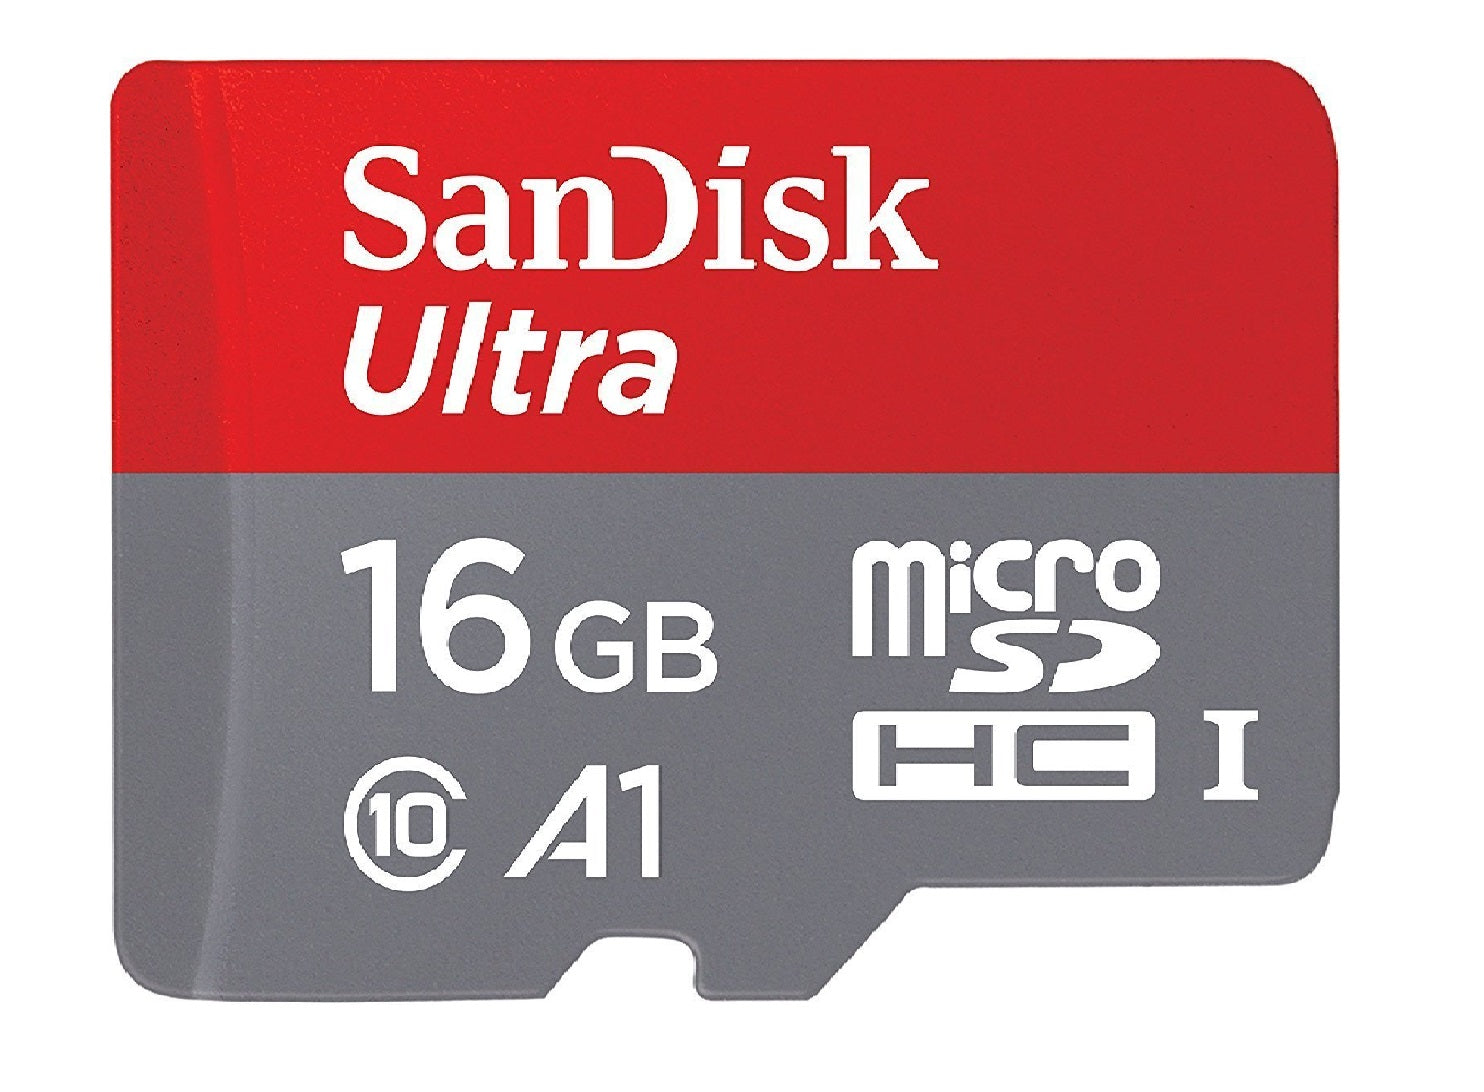 SanDisk Micro SD/SDHC 16GB Class 10 Memory Card (Up to 98MB/s Speed)